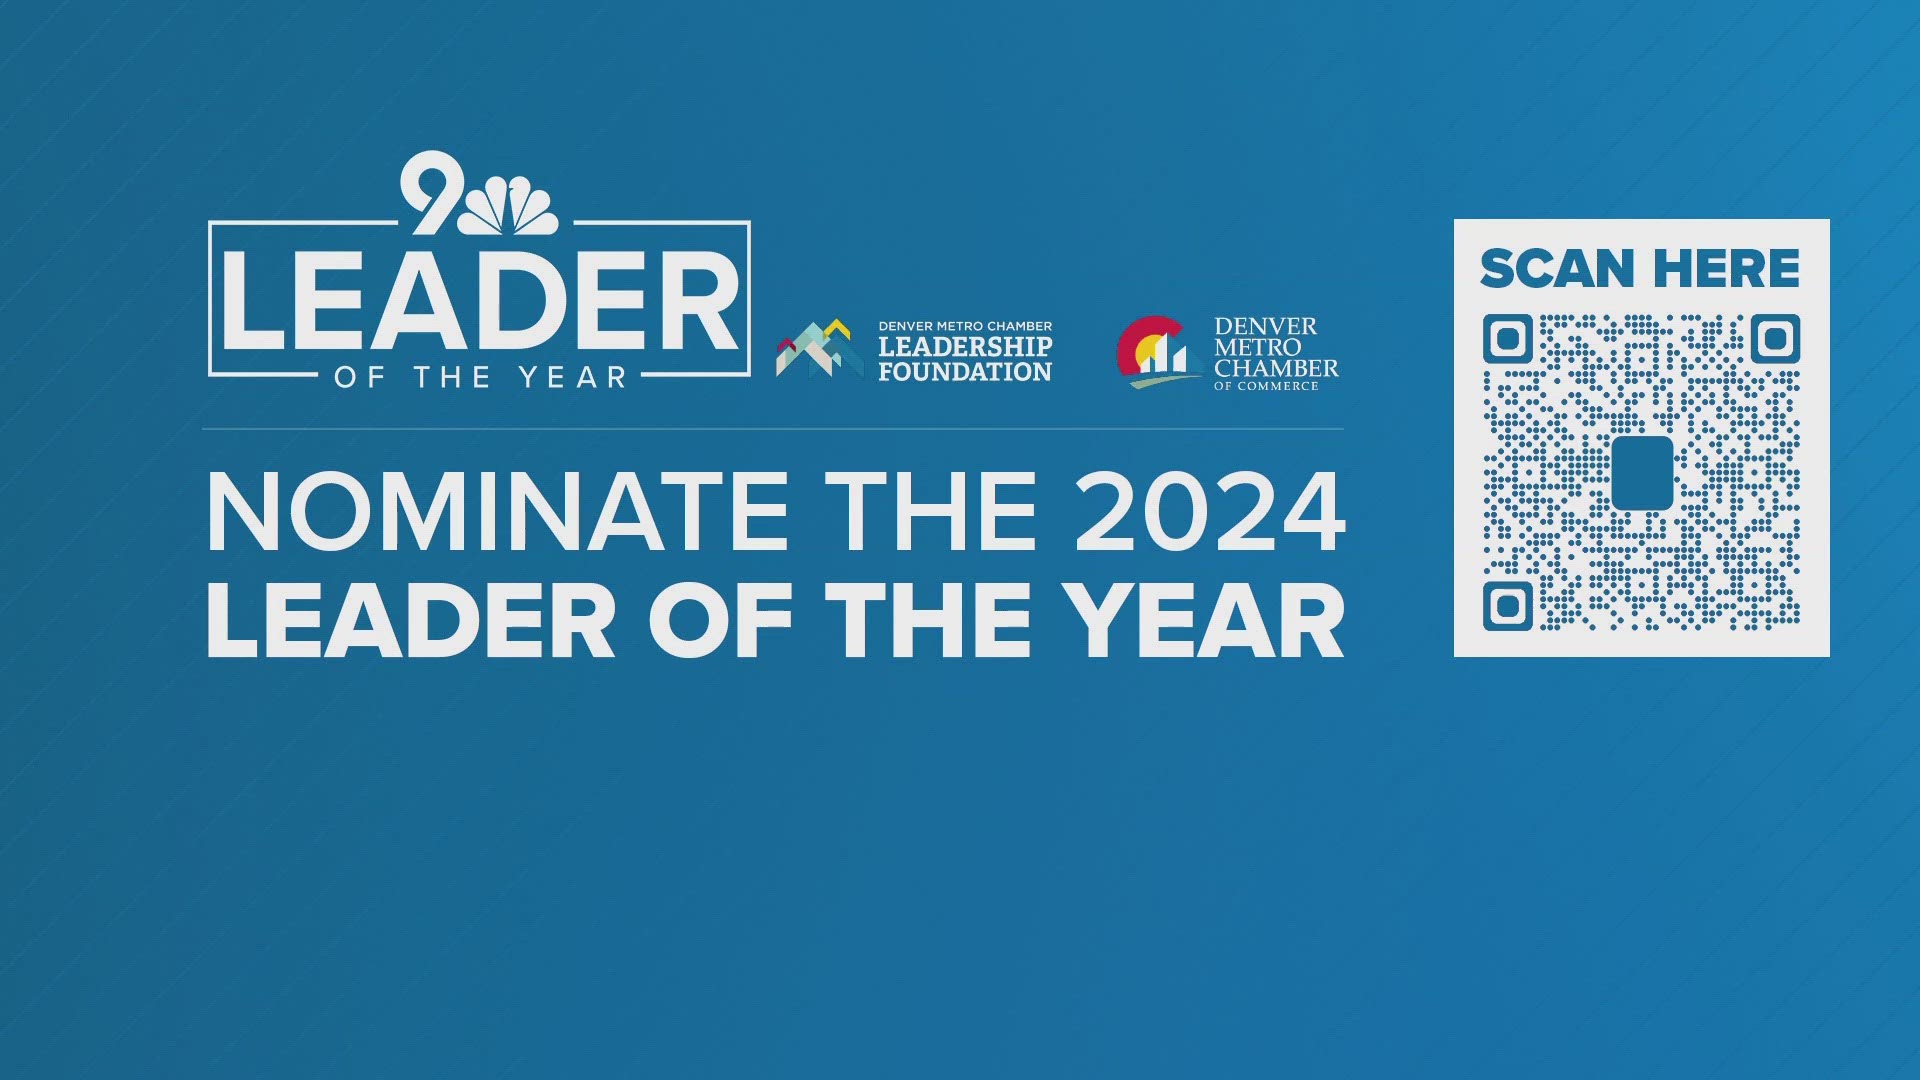 Do you know an outstanding leader who's made significant contributions to the metro Denver region? Here's how to nominate them.